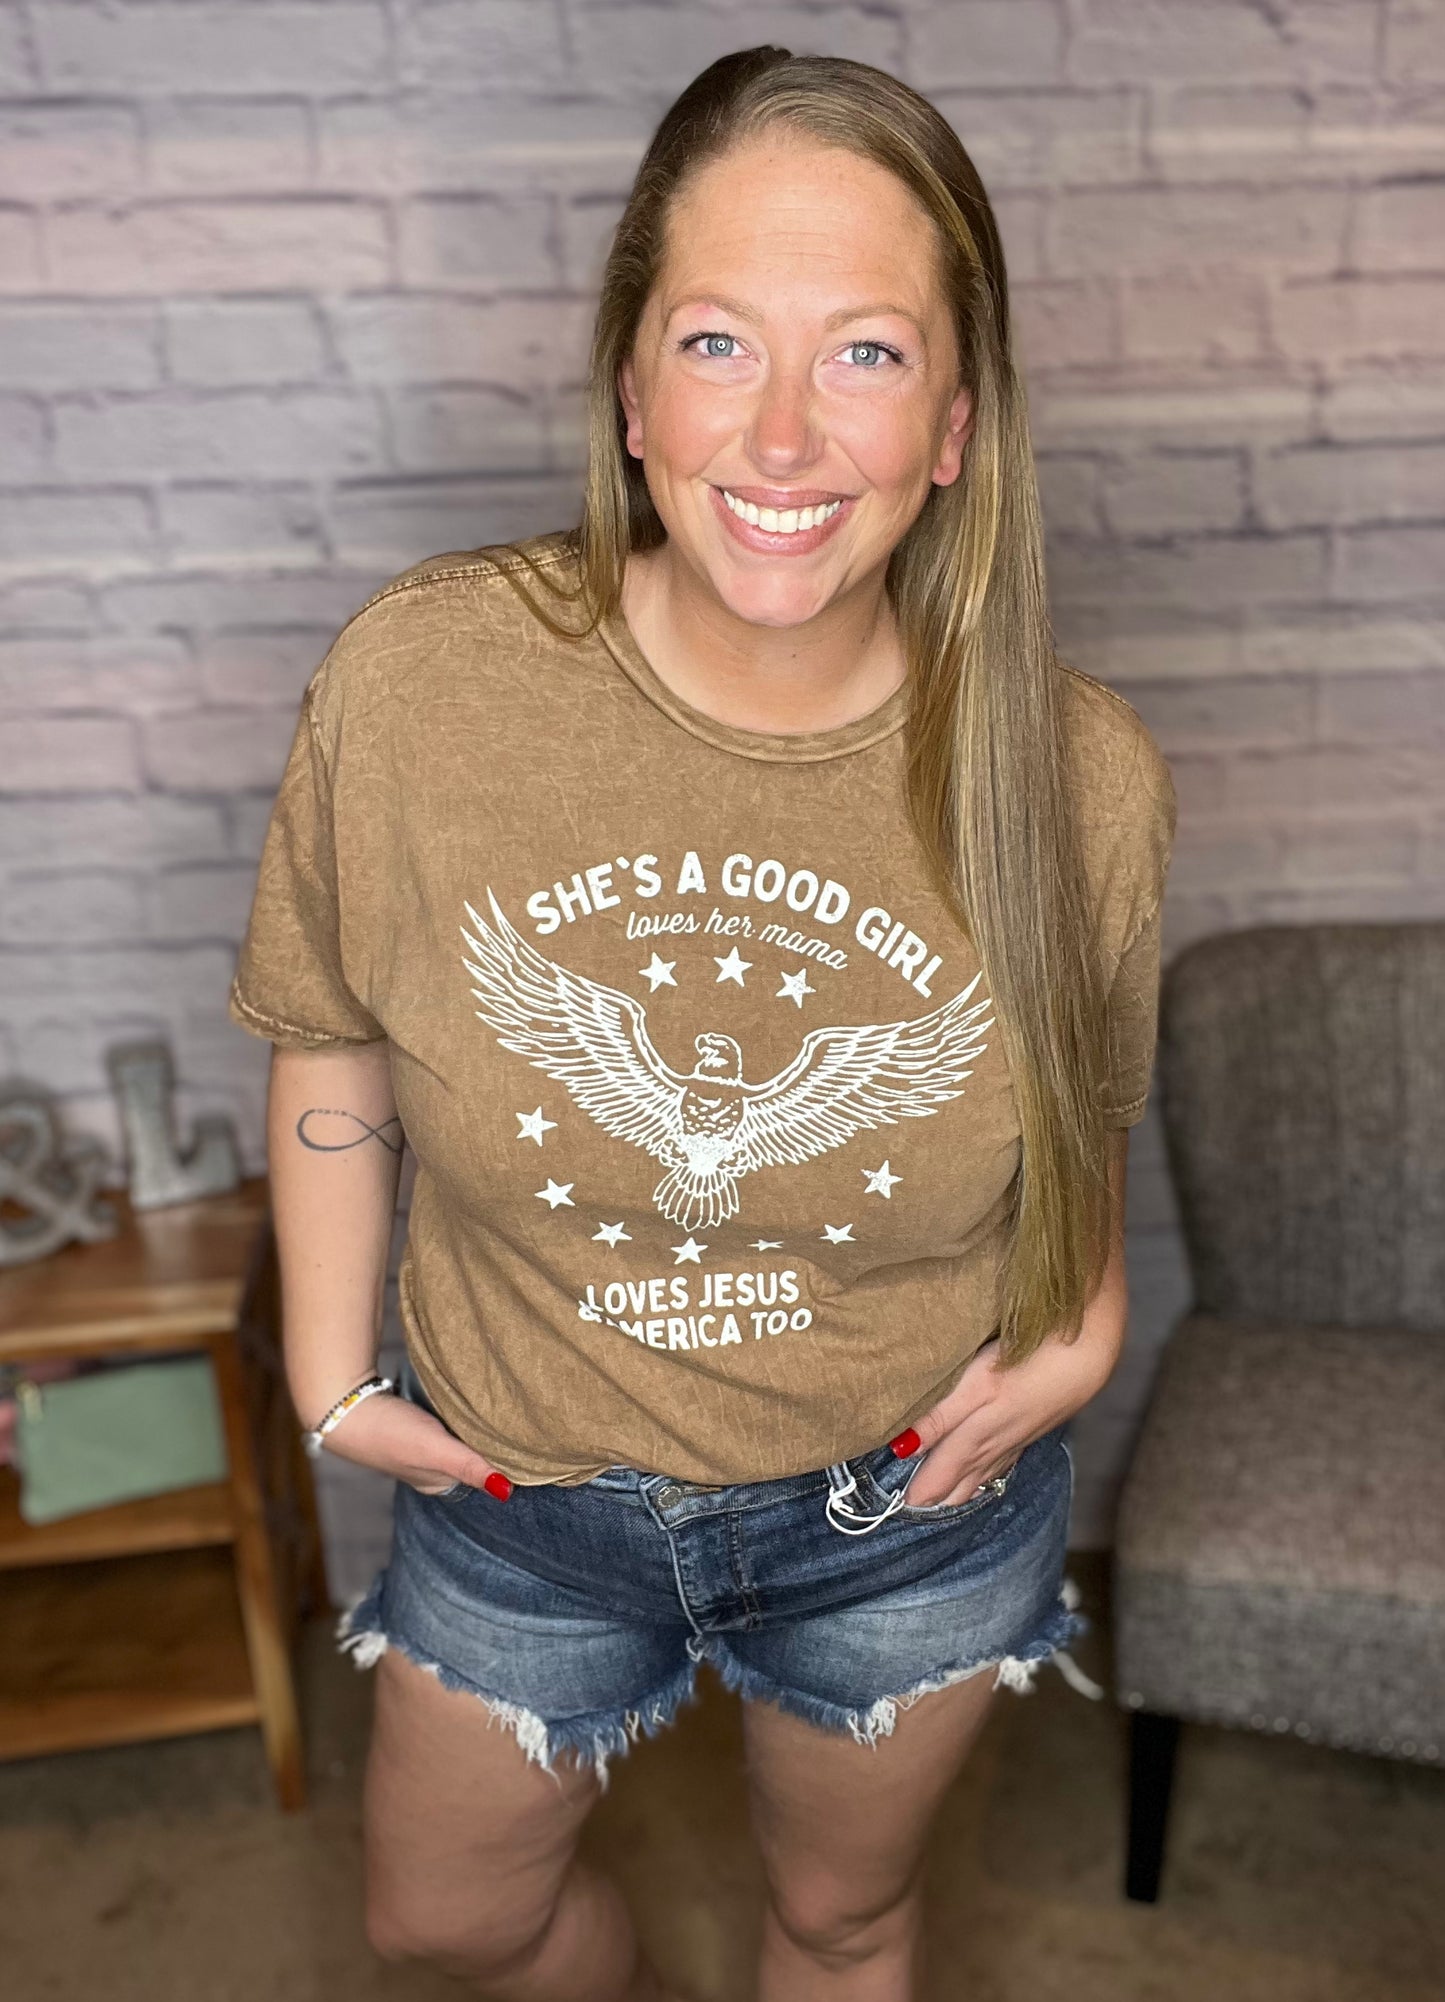 She's a Good Girl! Mineral Washed Graphic Top by Oat Collective - 2 Colors!